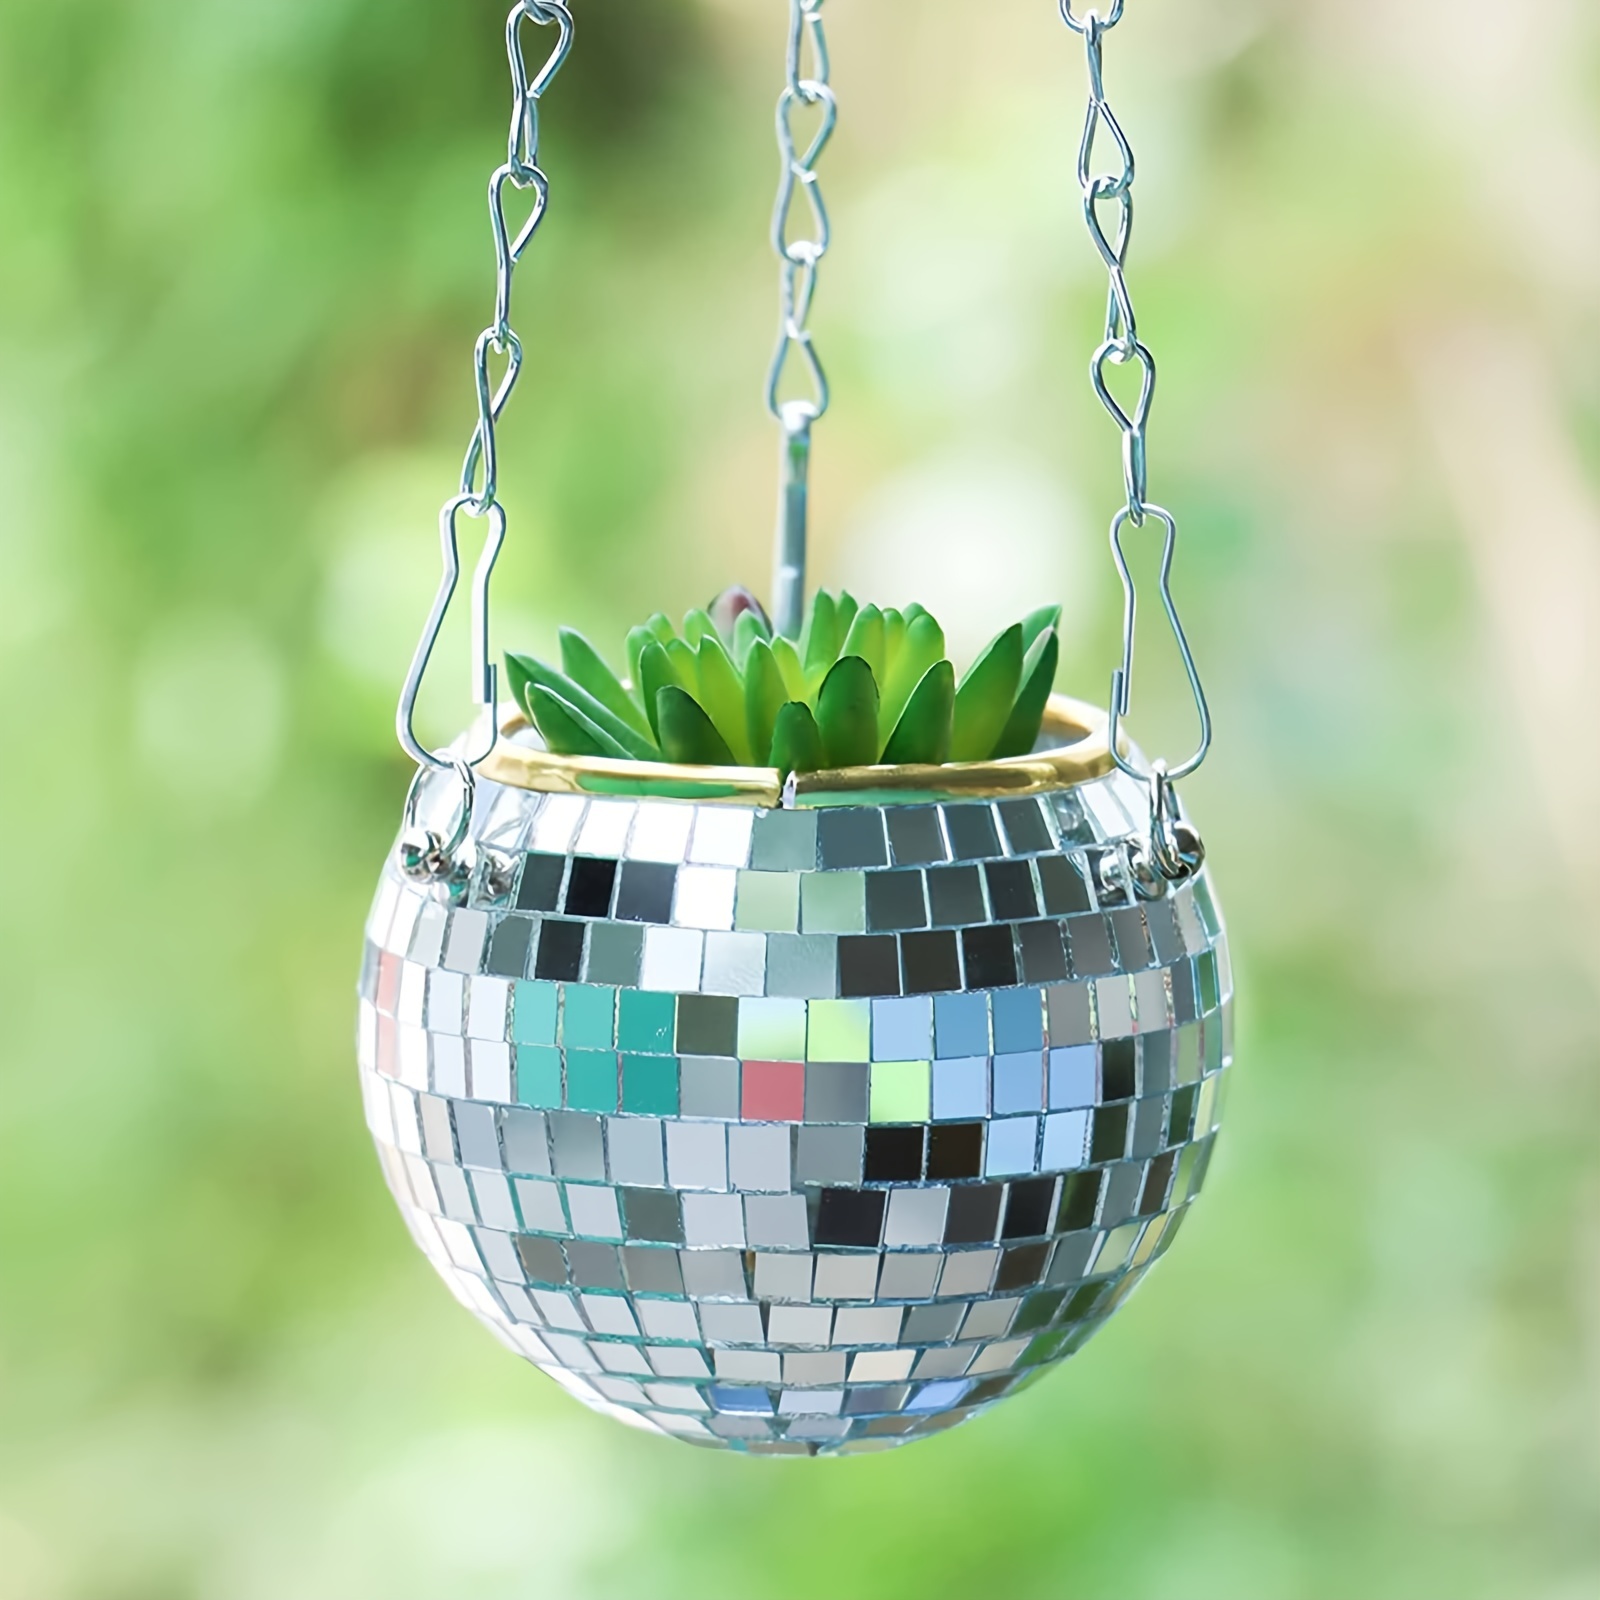 Mirror Disco Ball Planter, Hanging Planter Basket Flower Pot Plant Hanger  with Chain and Macrame Rope, Boho Hanging Planter for Indoor Outdoor  Plants, Boho Disco Ball Decor Home Decor 